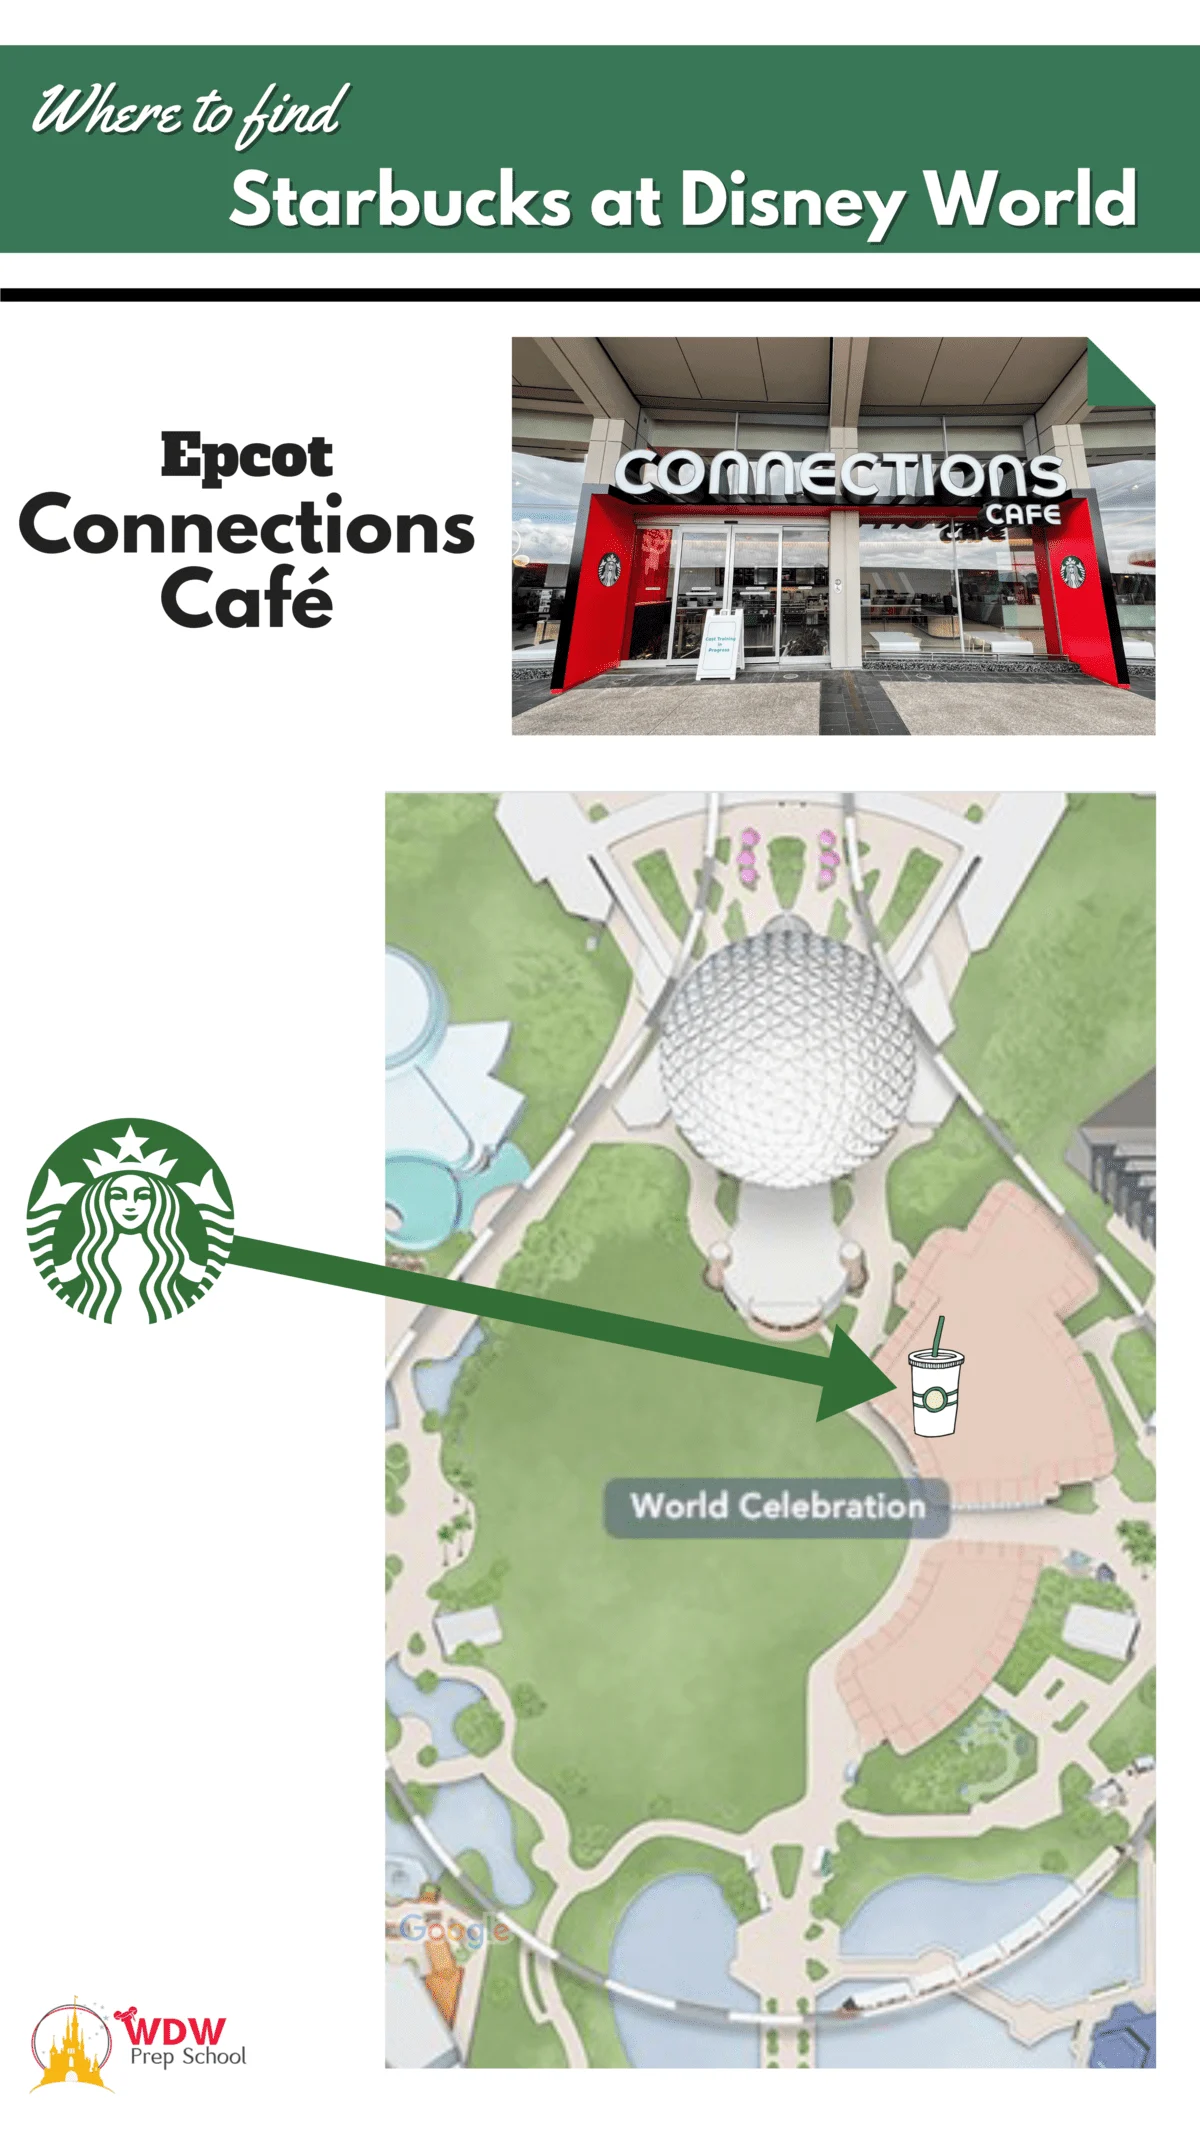 https://wdwprepschool.com/wp-content/uploads/starbucks-at-disney-world-here-everything-you-need-to-know-3.png.webp